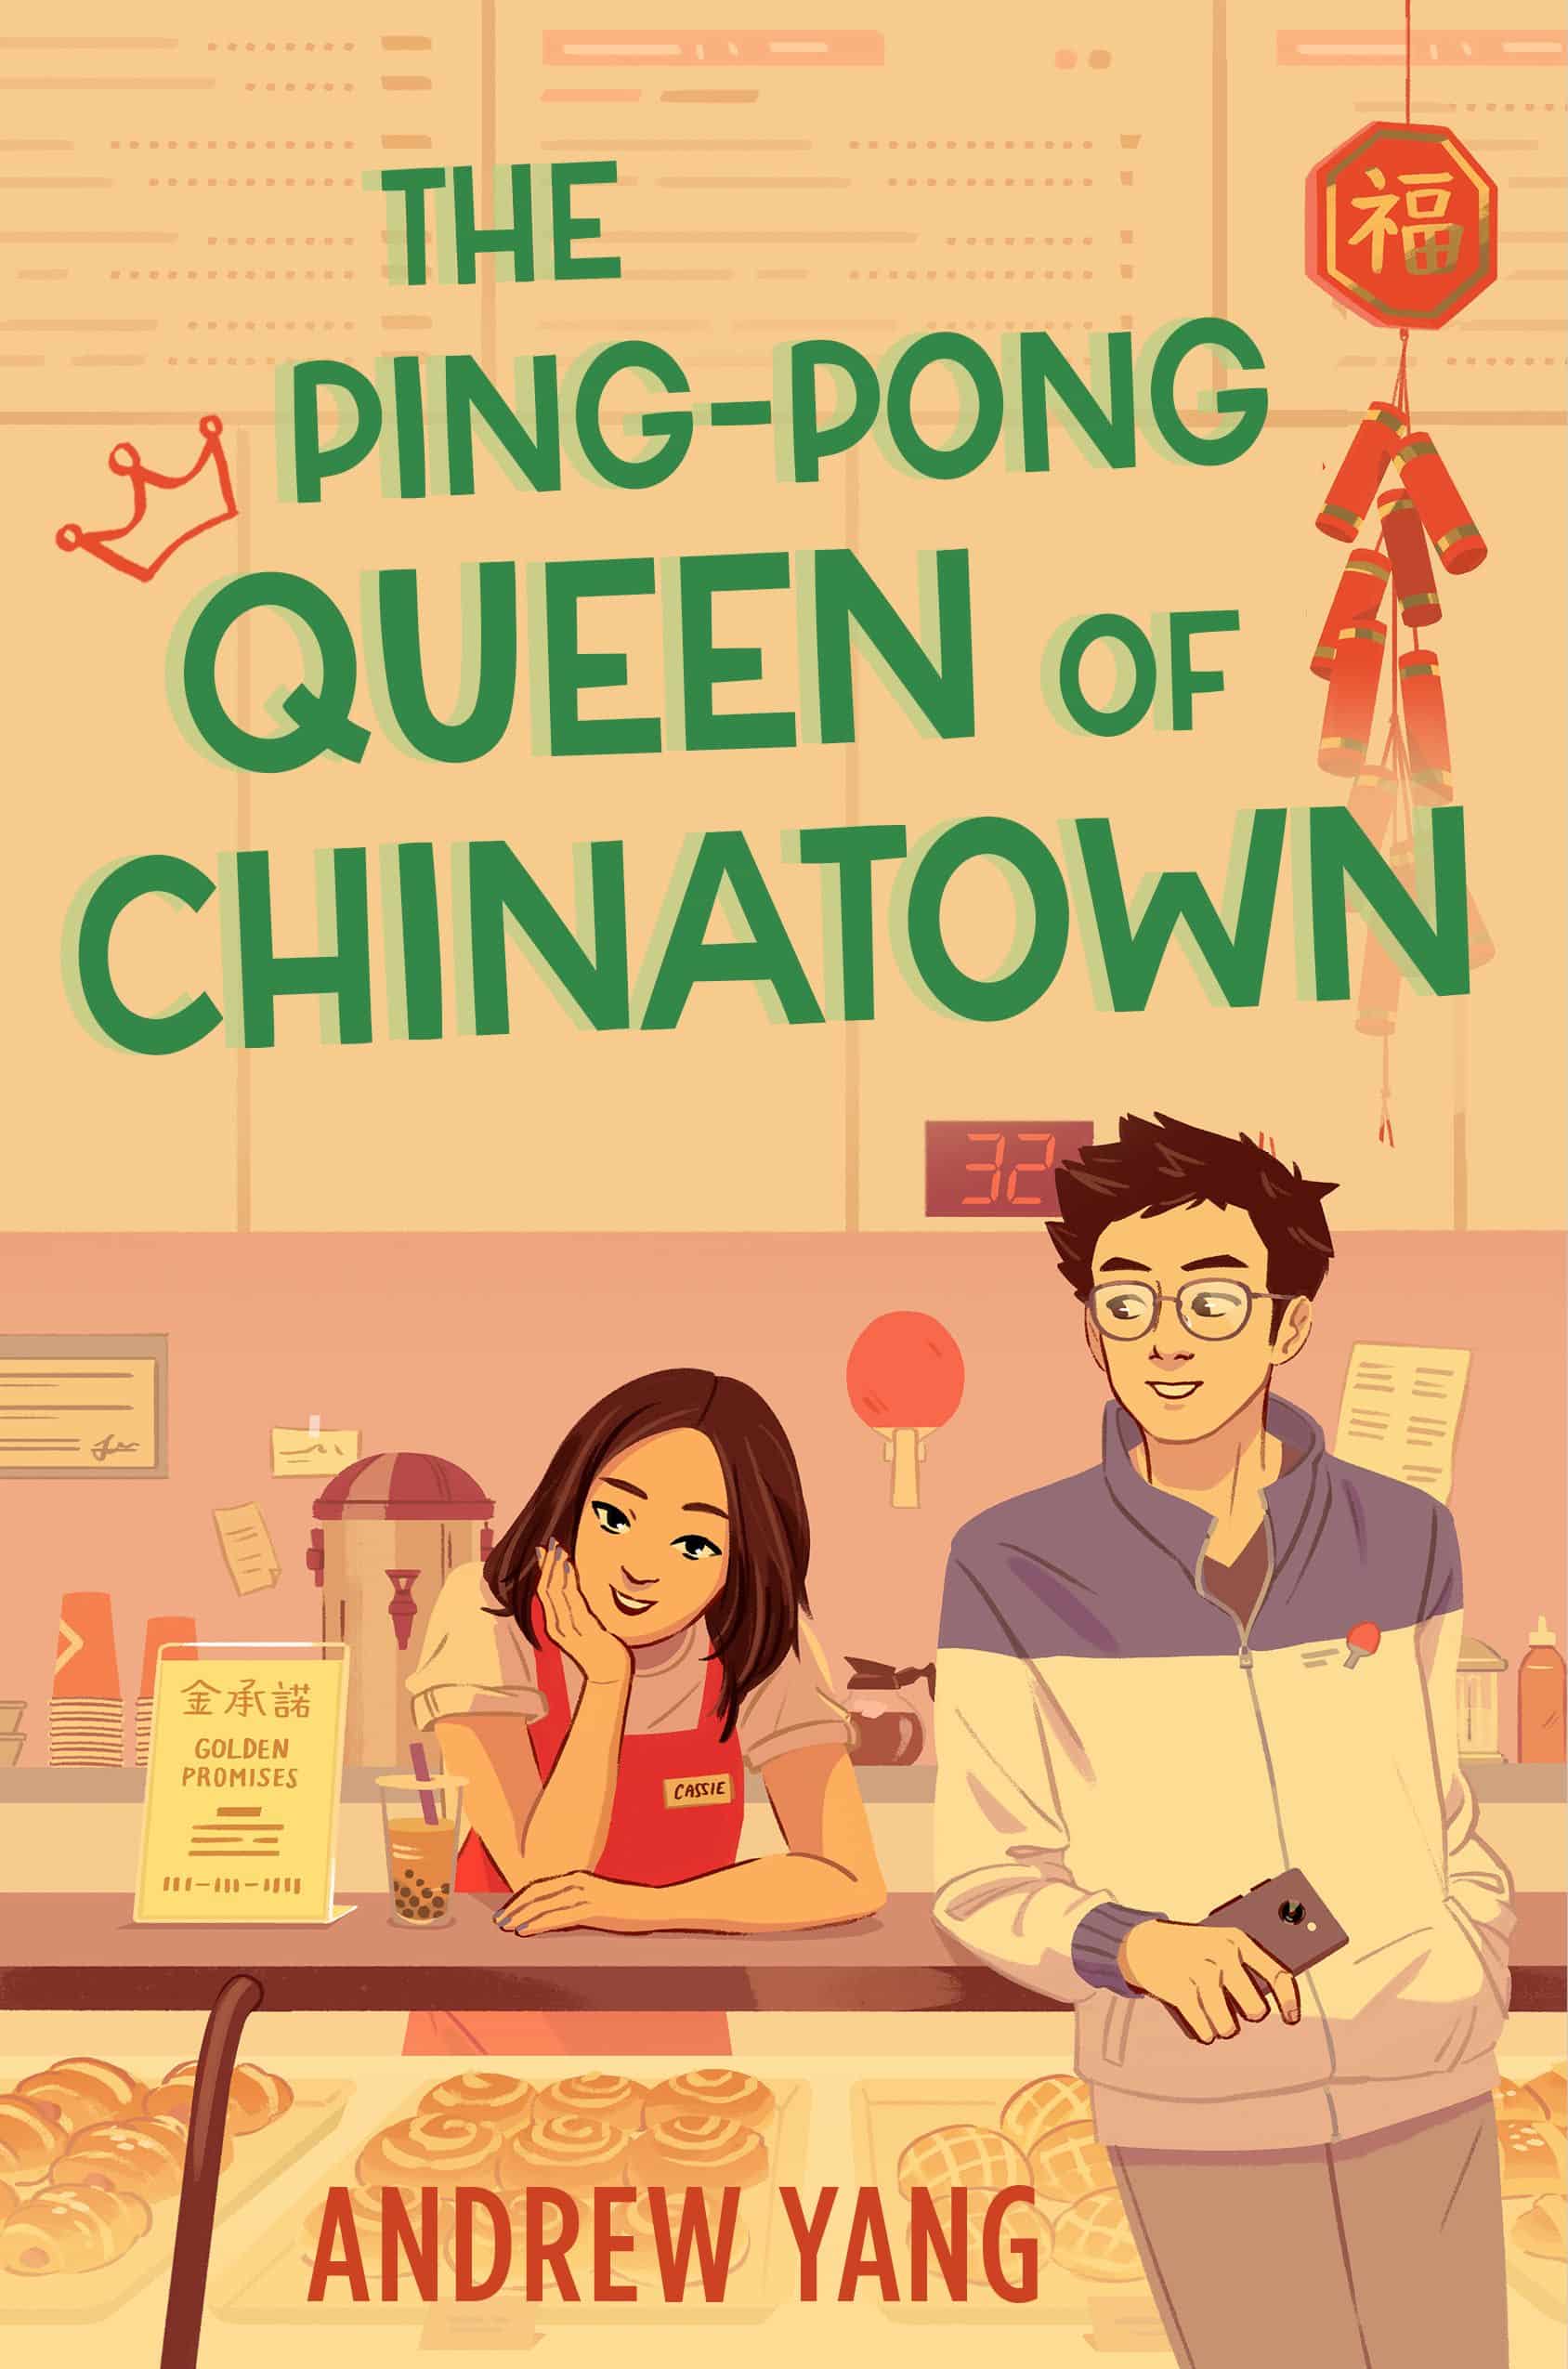 The Ping Pong Queen of Chinatown by Andrew Yang